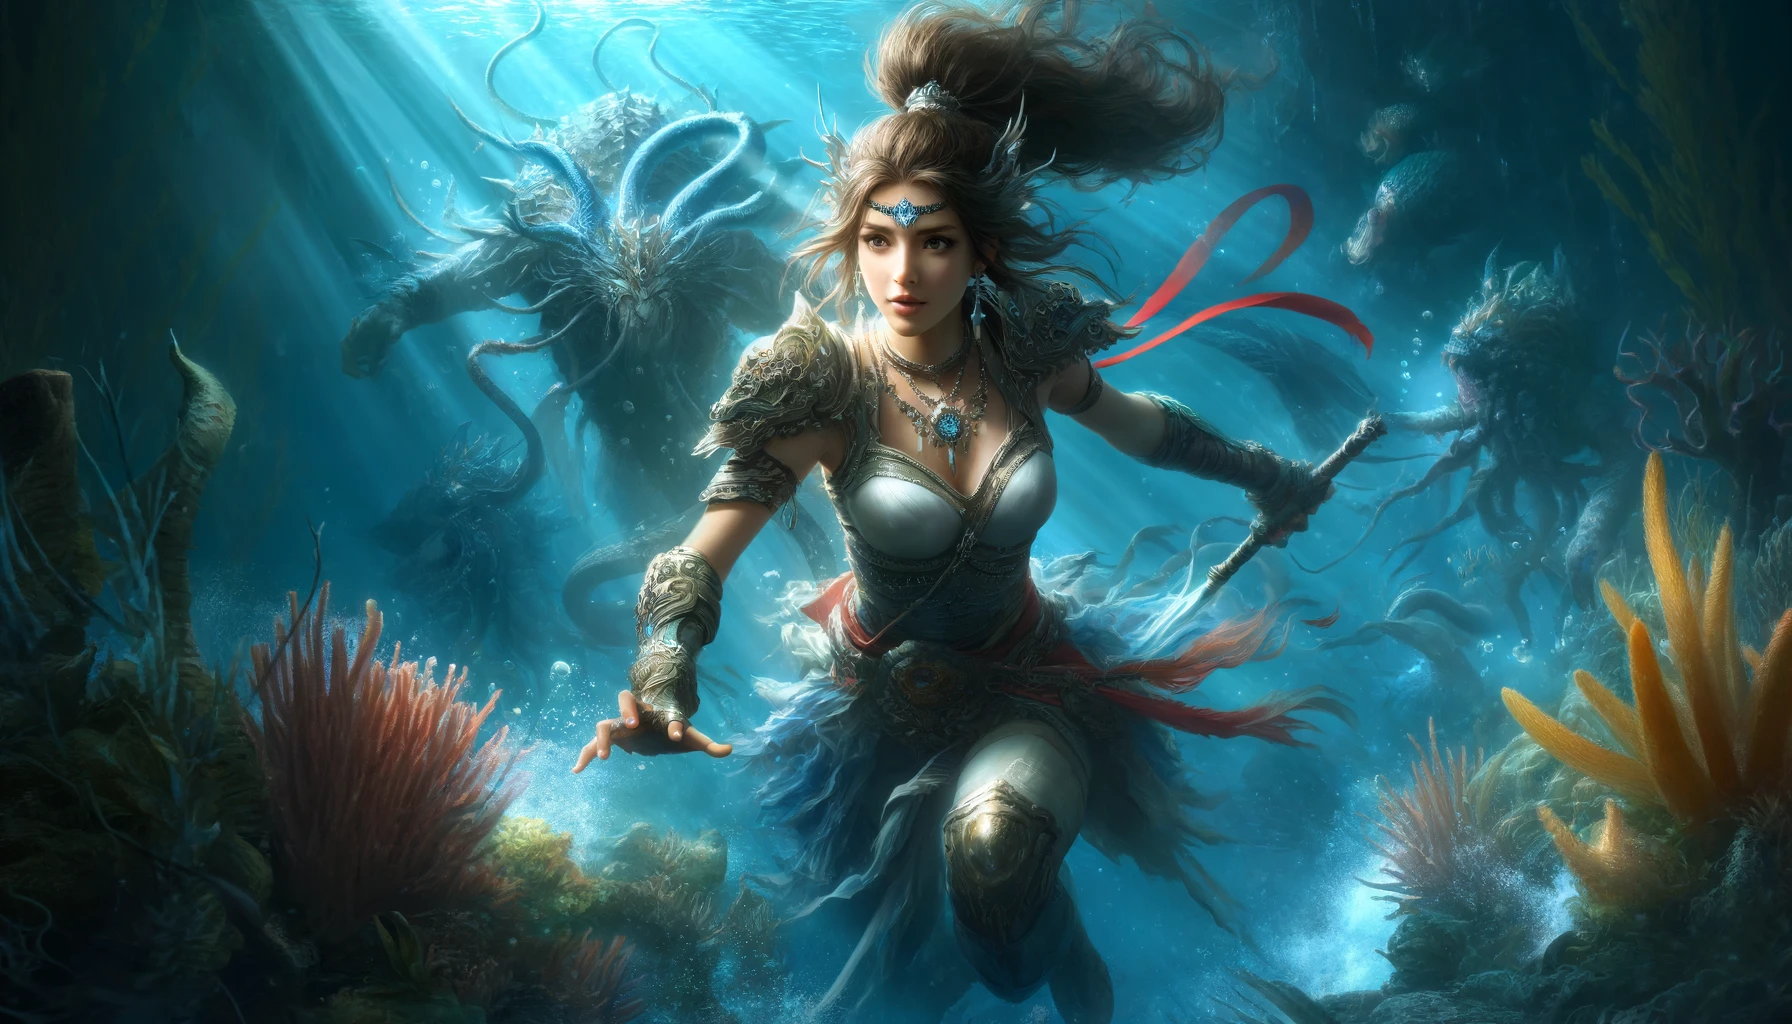 n Marvel Snap, Namora defends her underwater territory with grace and power, depicted in a highly realistic style against a backdrop of deep sea flora and fauna.